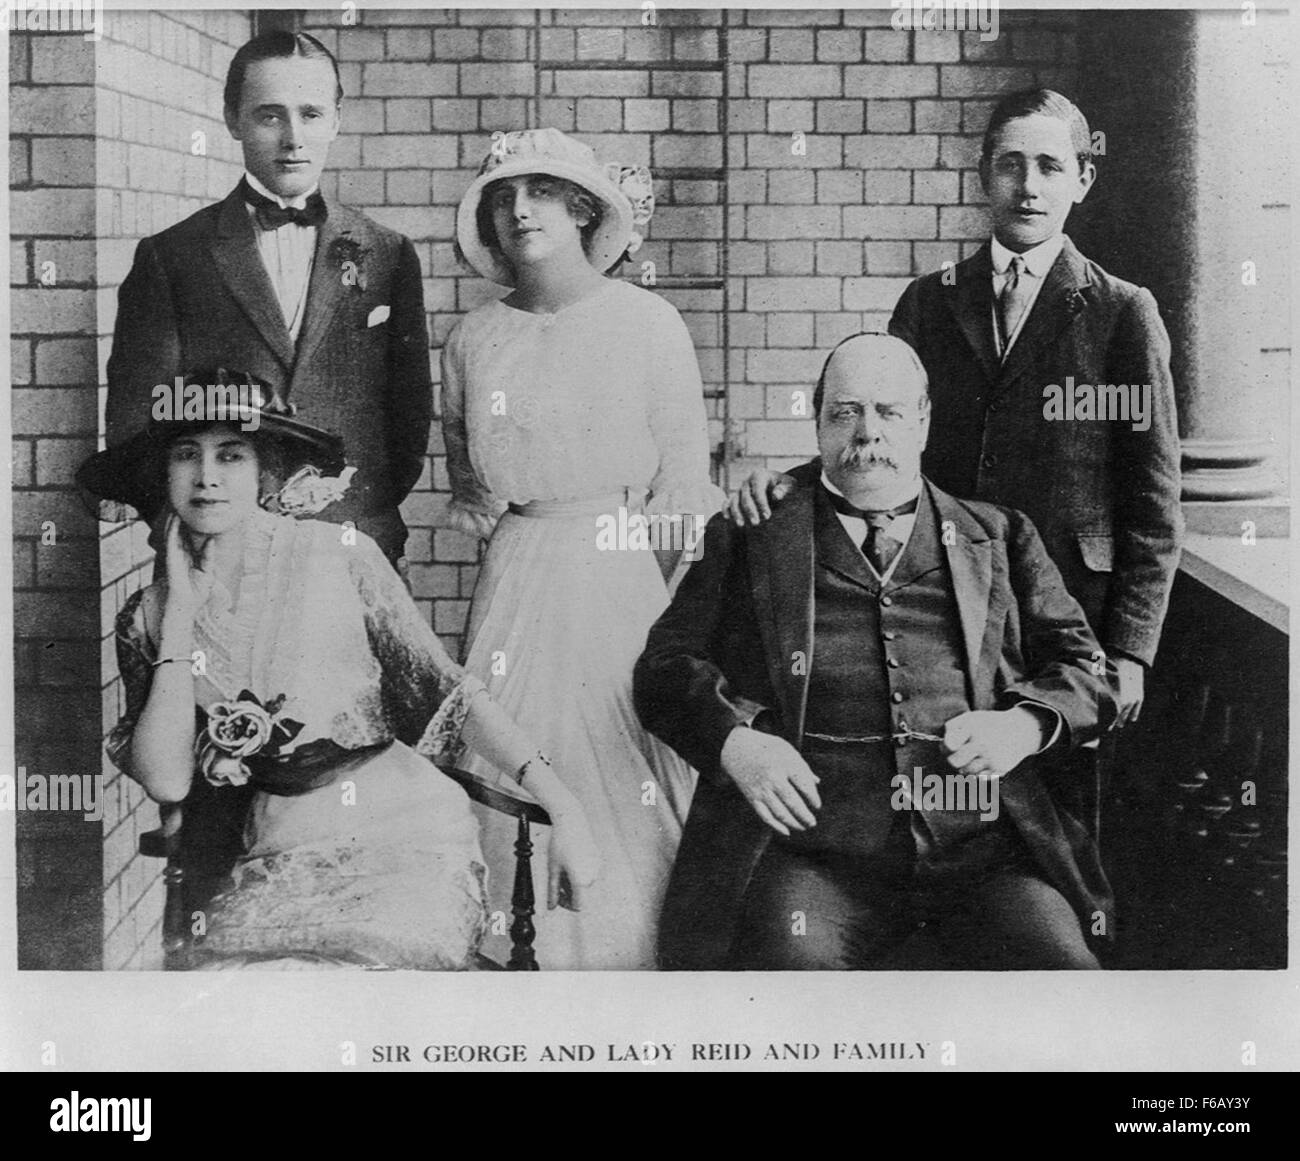 Sir George and Lady Reid and family Sir George and Lady Reid and family Stock Photo